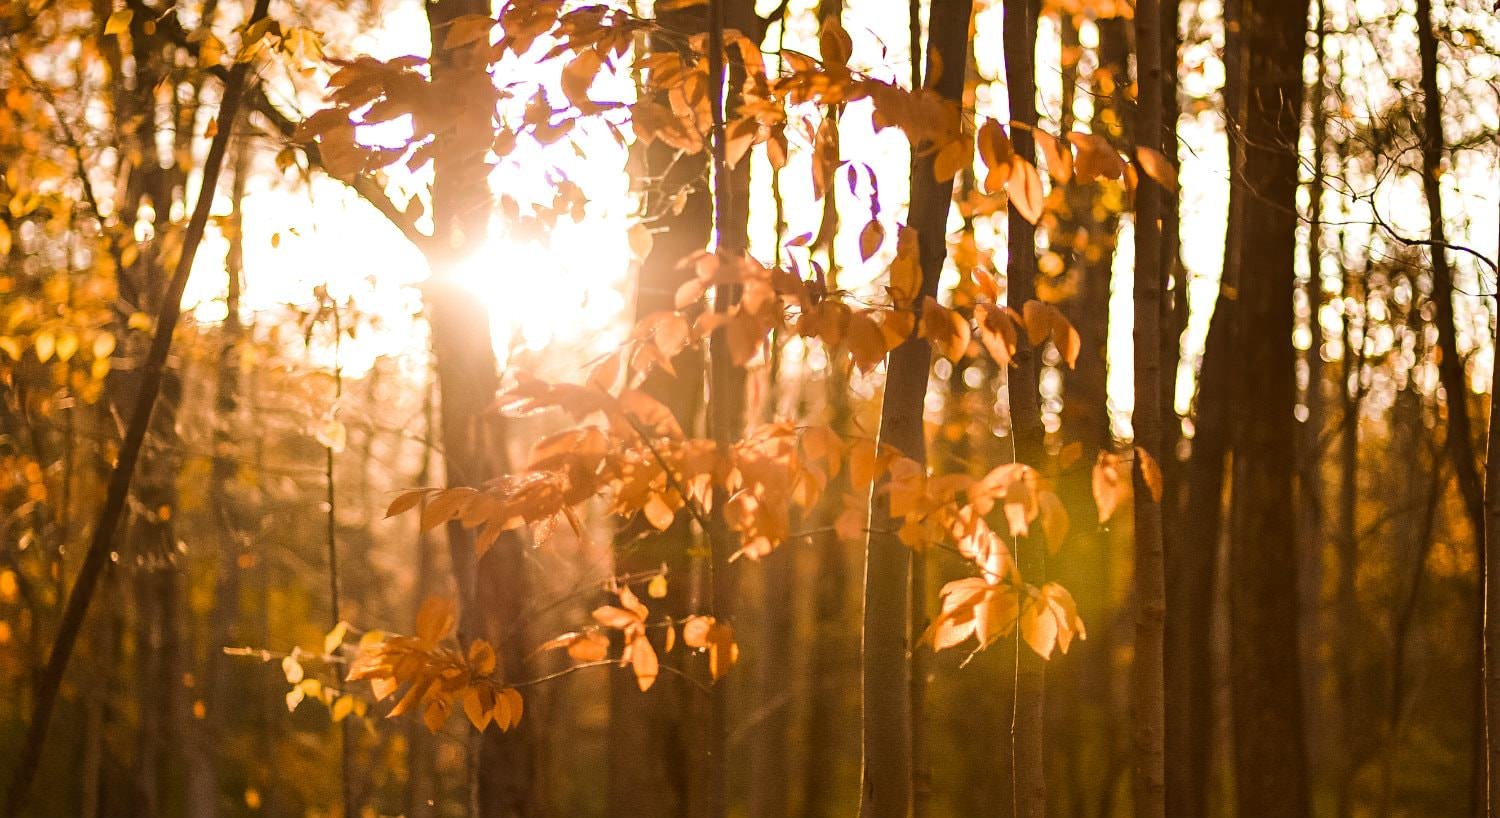 Close-up view of burnt orange leaves on almost bare trees surrounded by diffused light from the setting sun